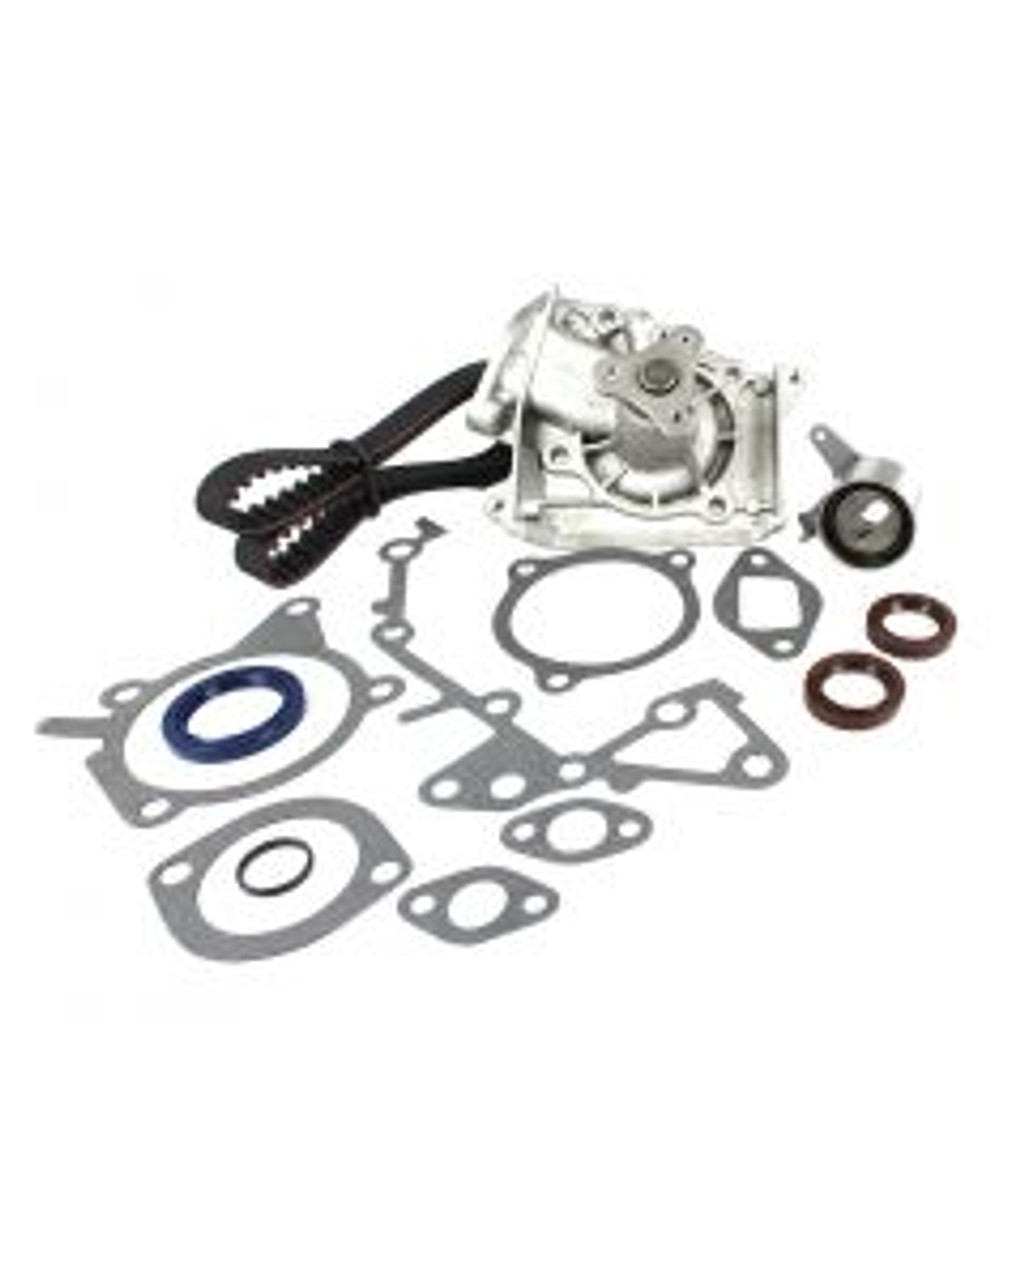 Timing Belt Kit with Water Pump 1.6L 1992 Mazda MX-3 - TBK451WP.14